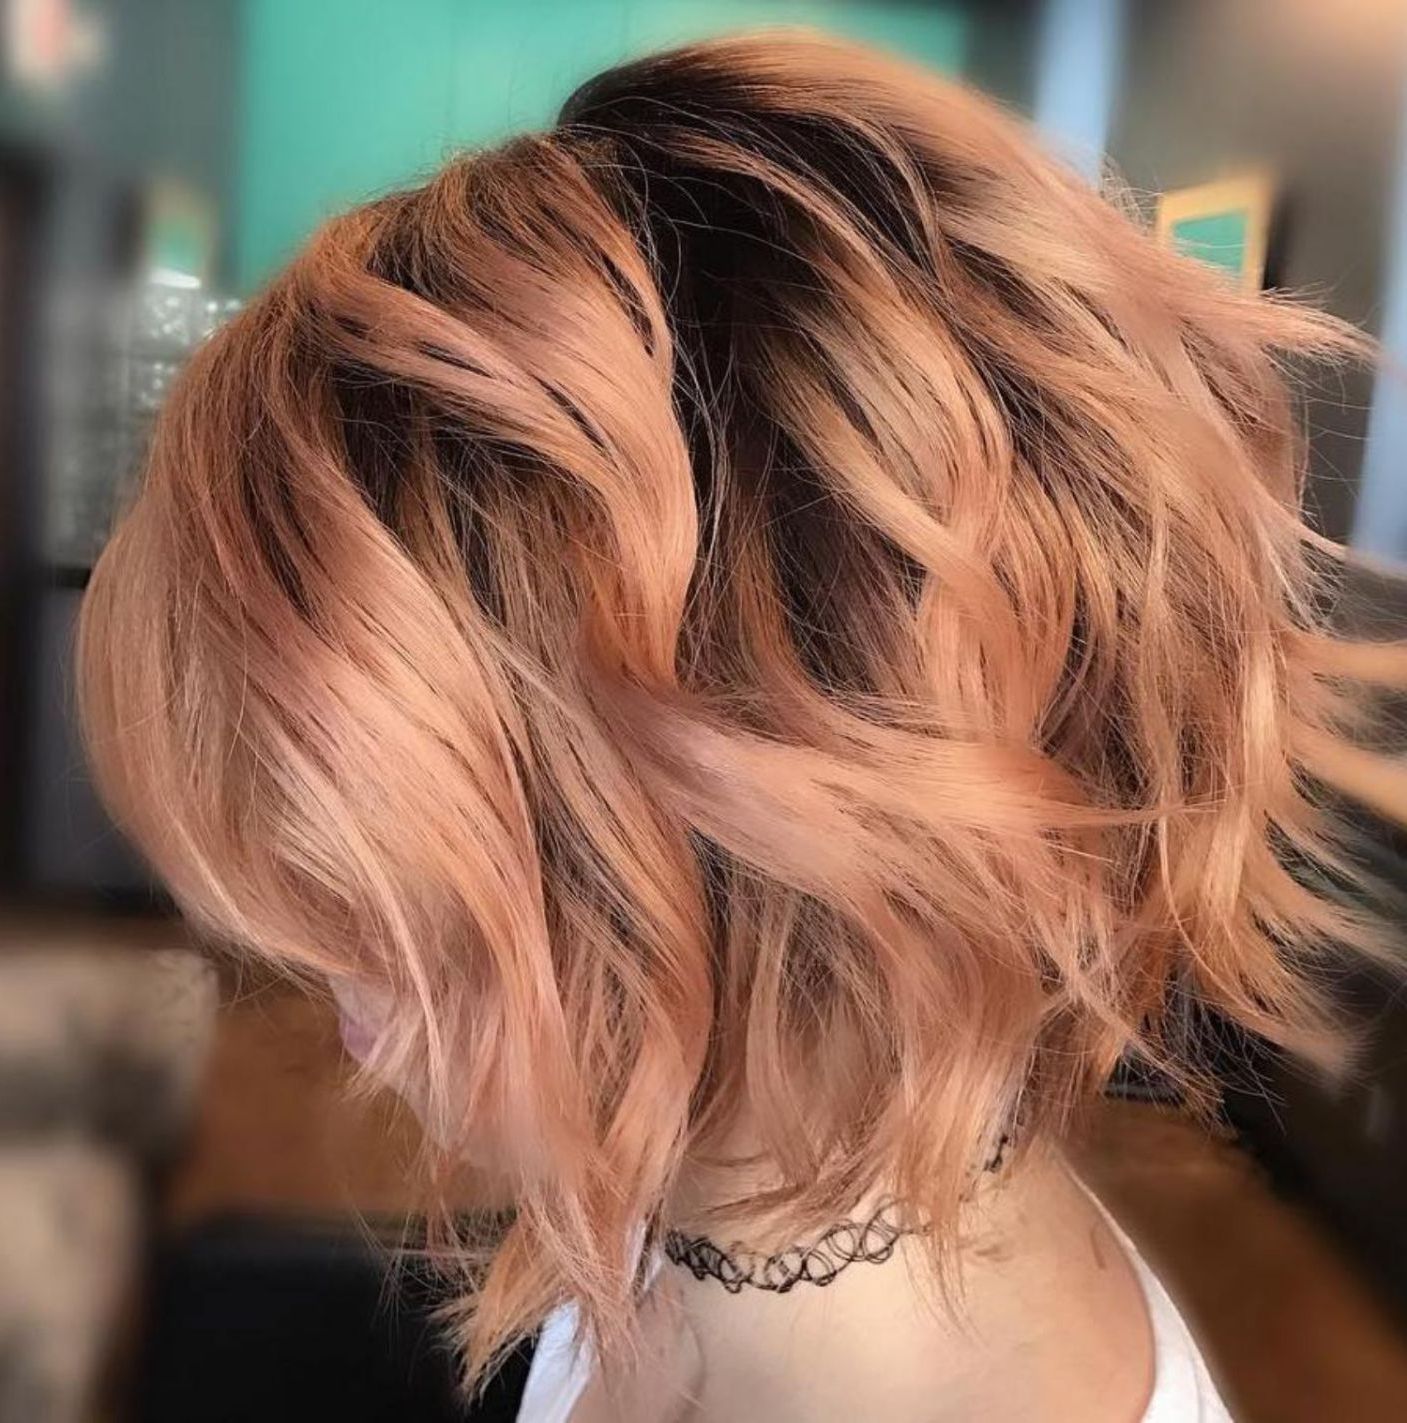 50 Gorgeous Wavy Bob Hairstyles With An Extra Touch Of With Well Known Sassy Wavy Bob Hairstyles (View 7 of 20)